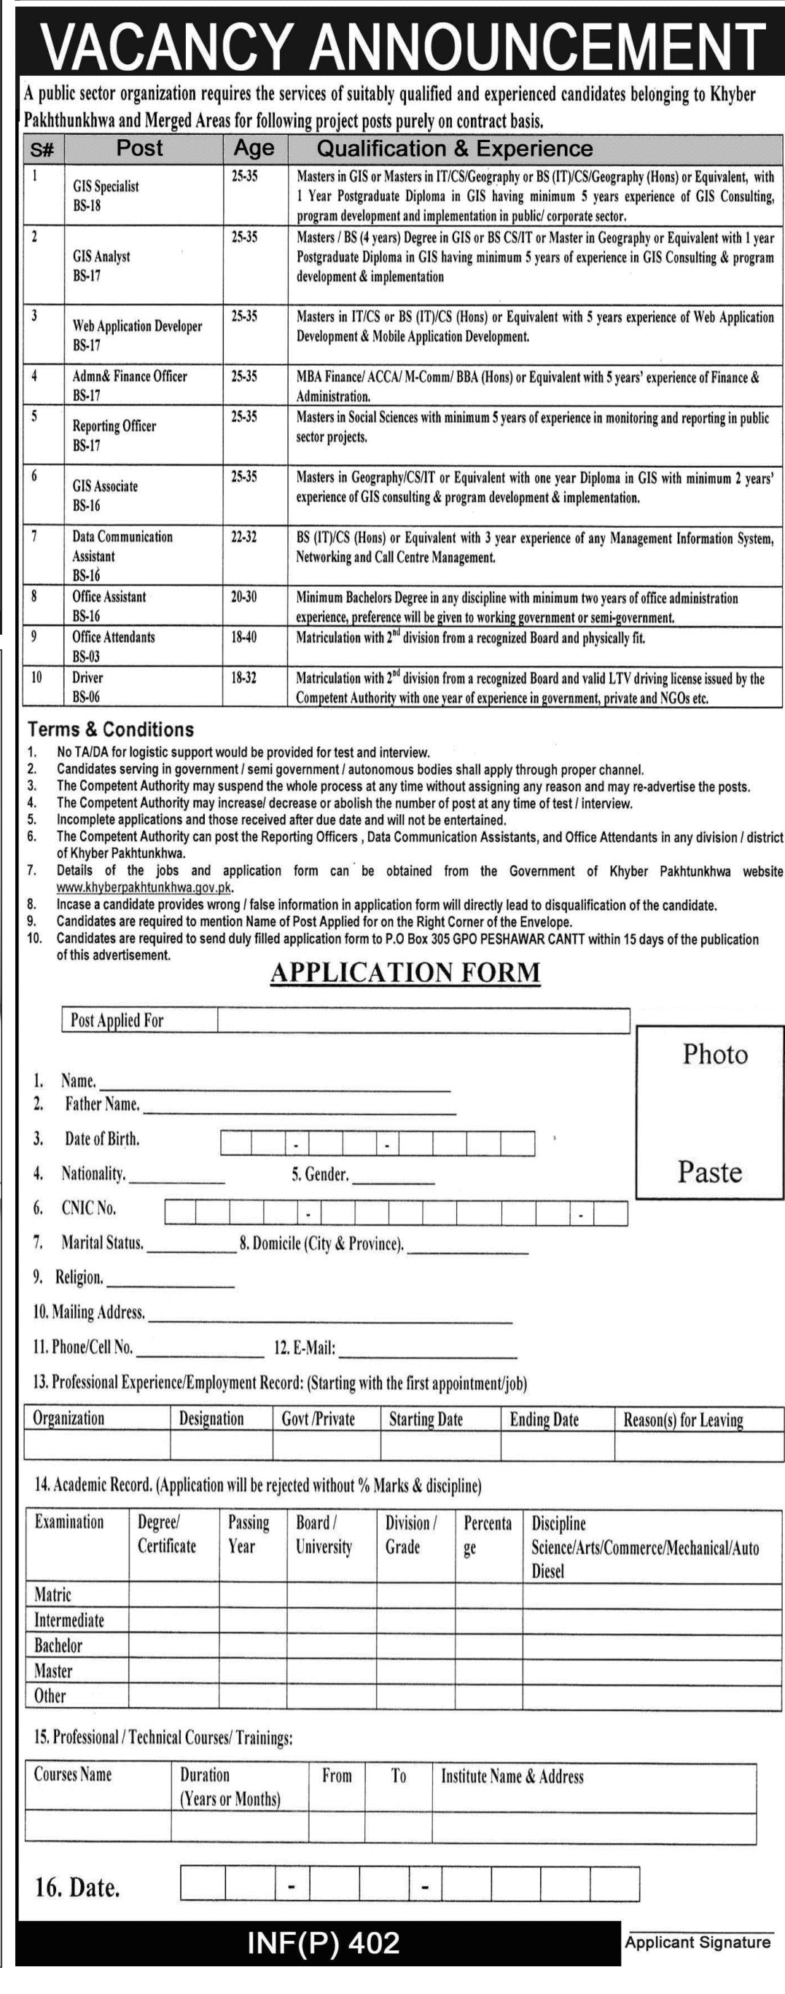 PO Box 305 Public Sector Organization Jobs 2019 for 10+ GIS, IT, Admin, Finance, Office & Driver Posts